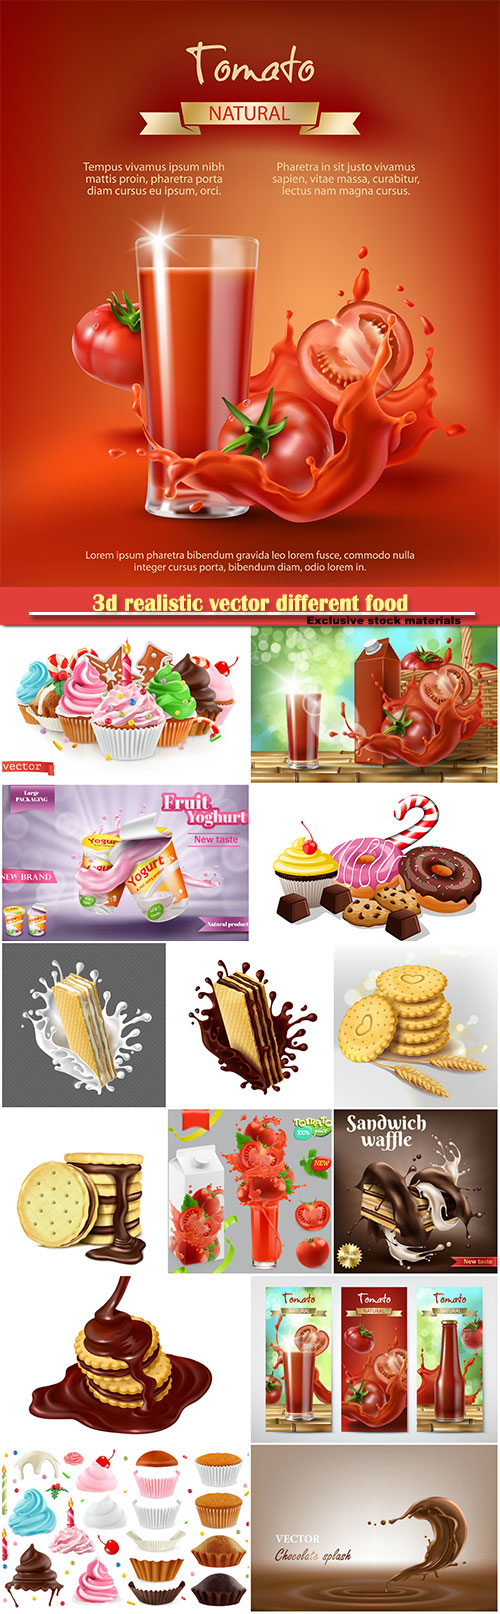 3d realistic vector different food, sweet dessert, cake, cupcake, chocolate ...